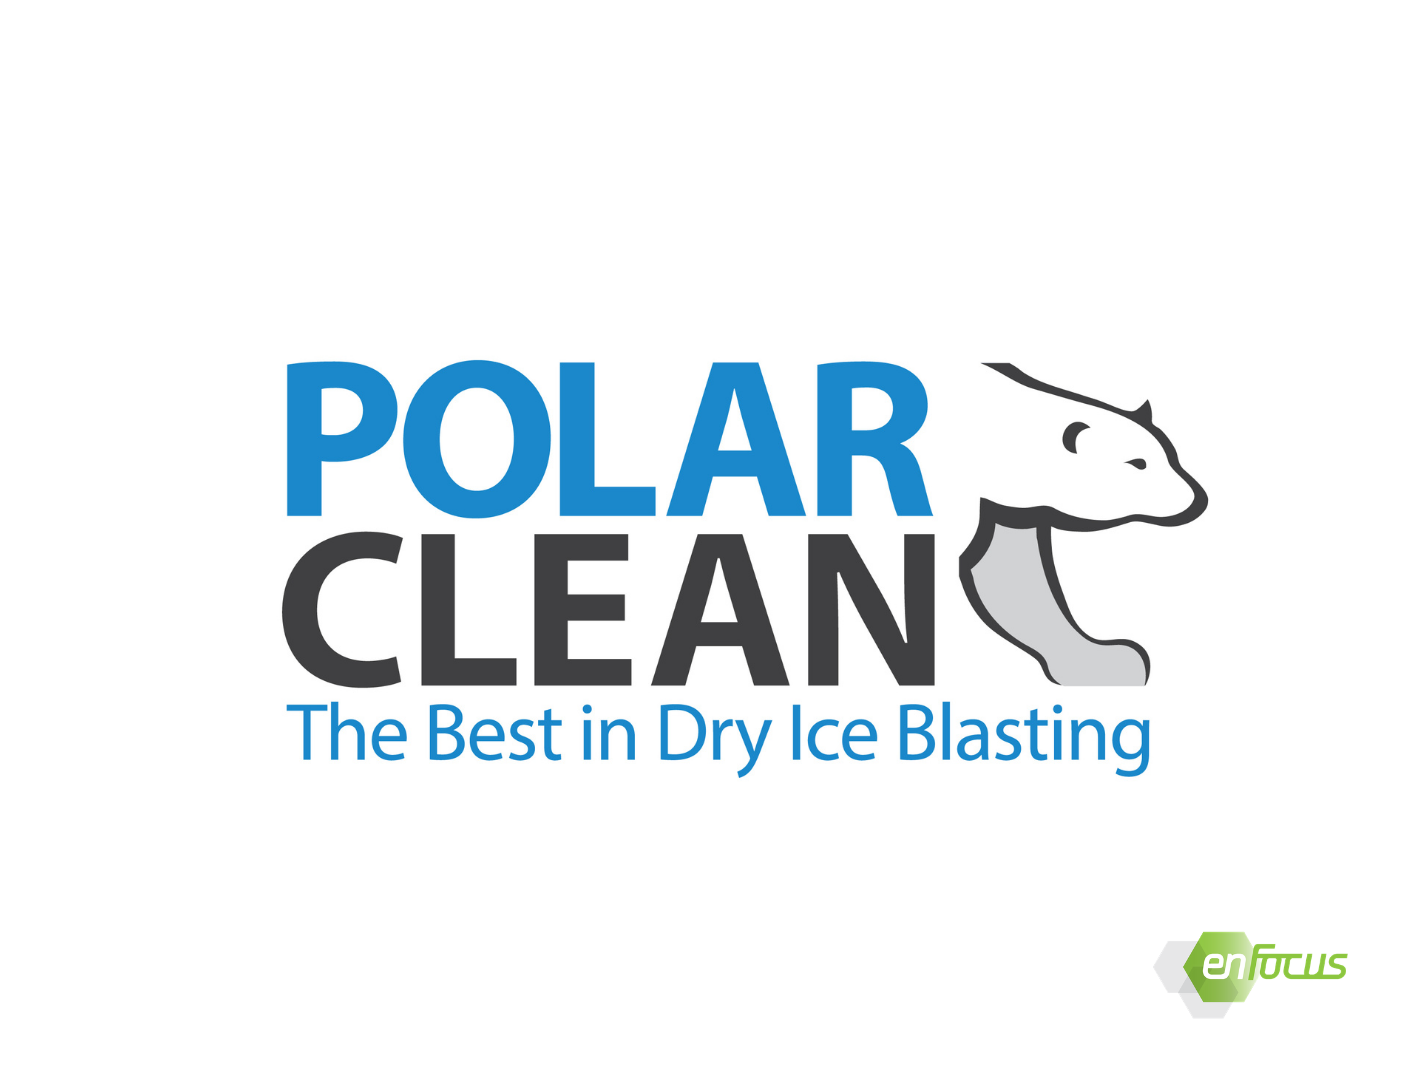 Polar Clean Turns to enFocus for Knowledge and Leadership in Submitting a Successful Grant Application